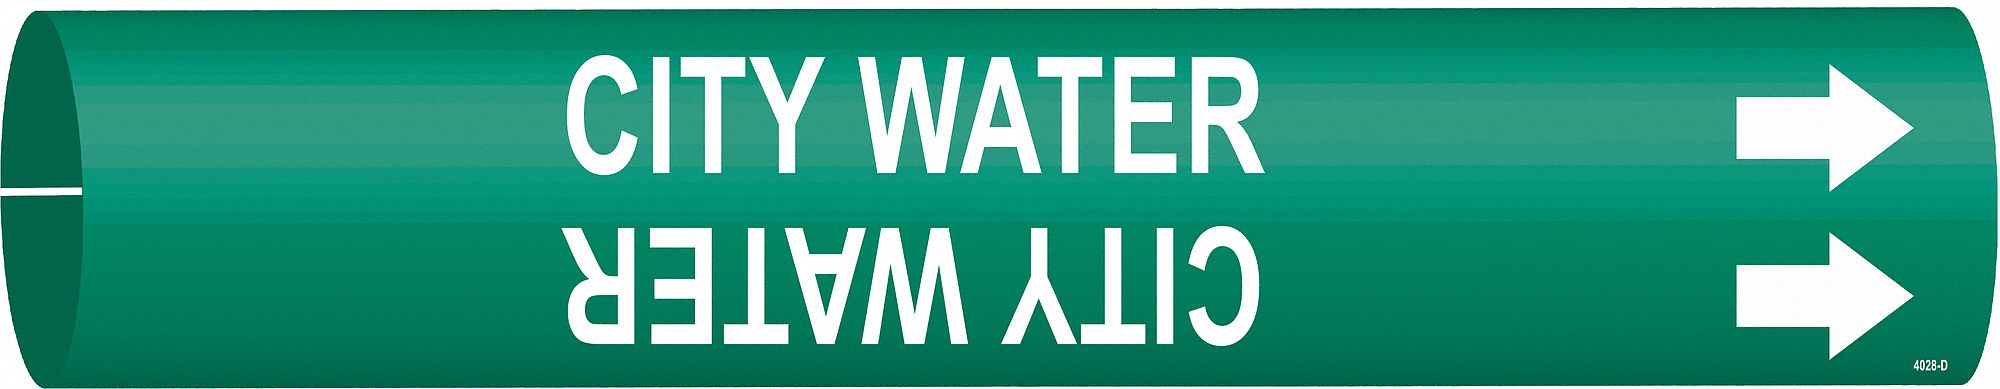 Pipe Marker,City Water,Green,4 to 6 In